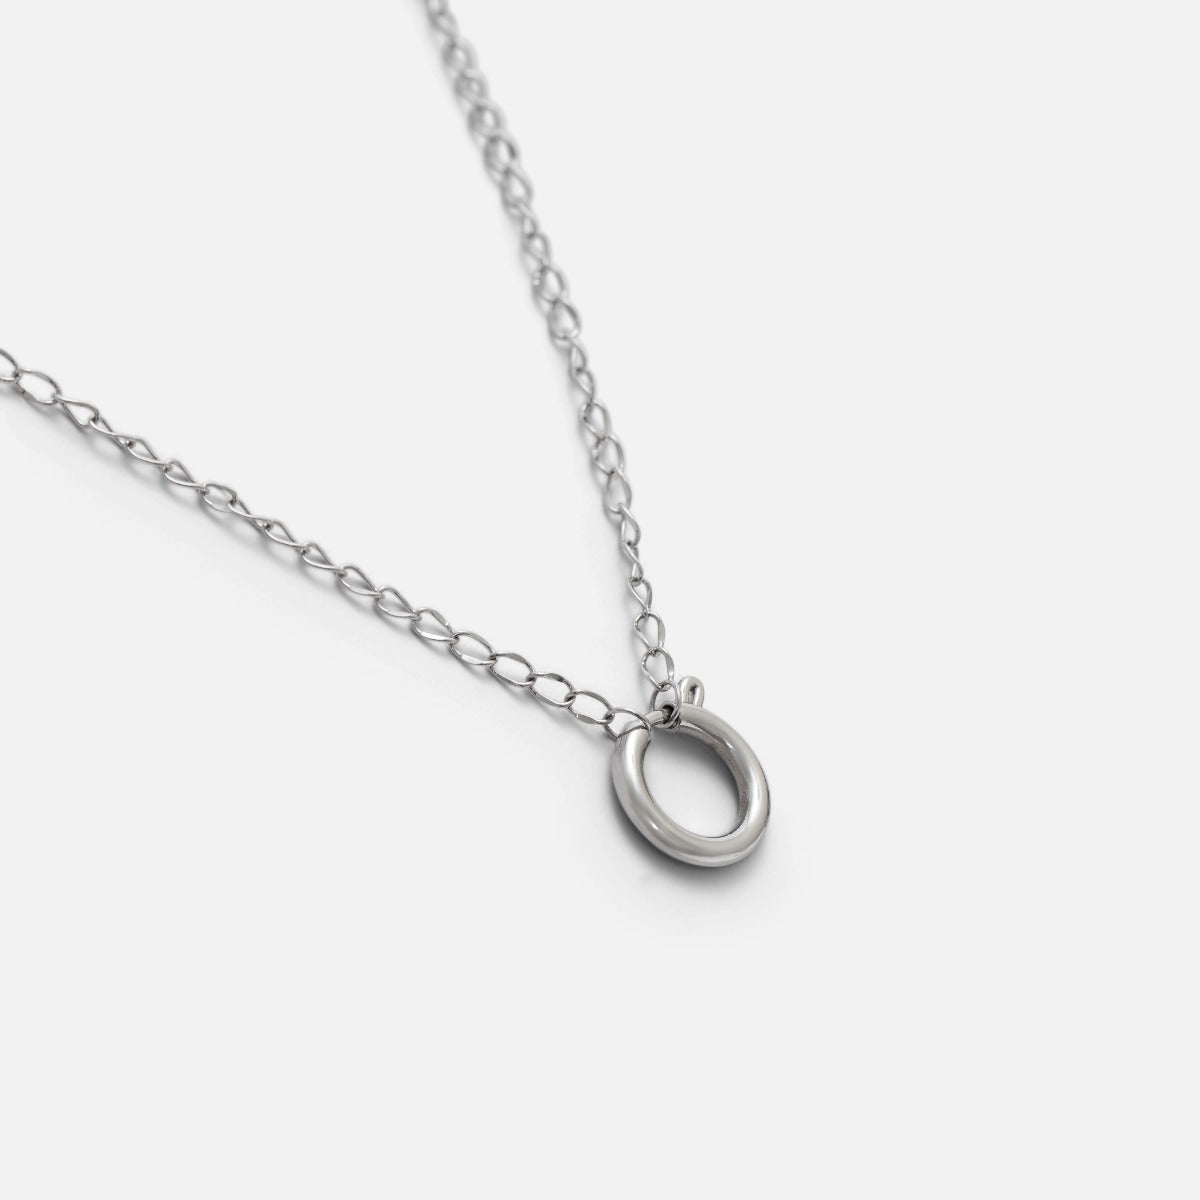 Silver chain with clasp pendent